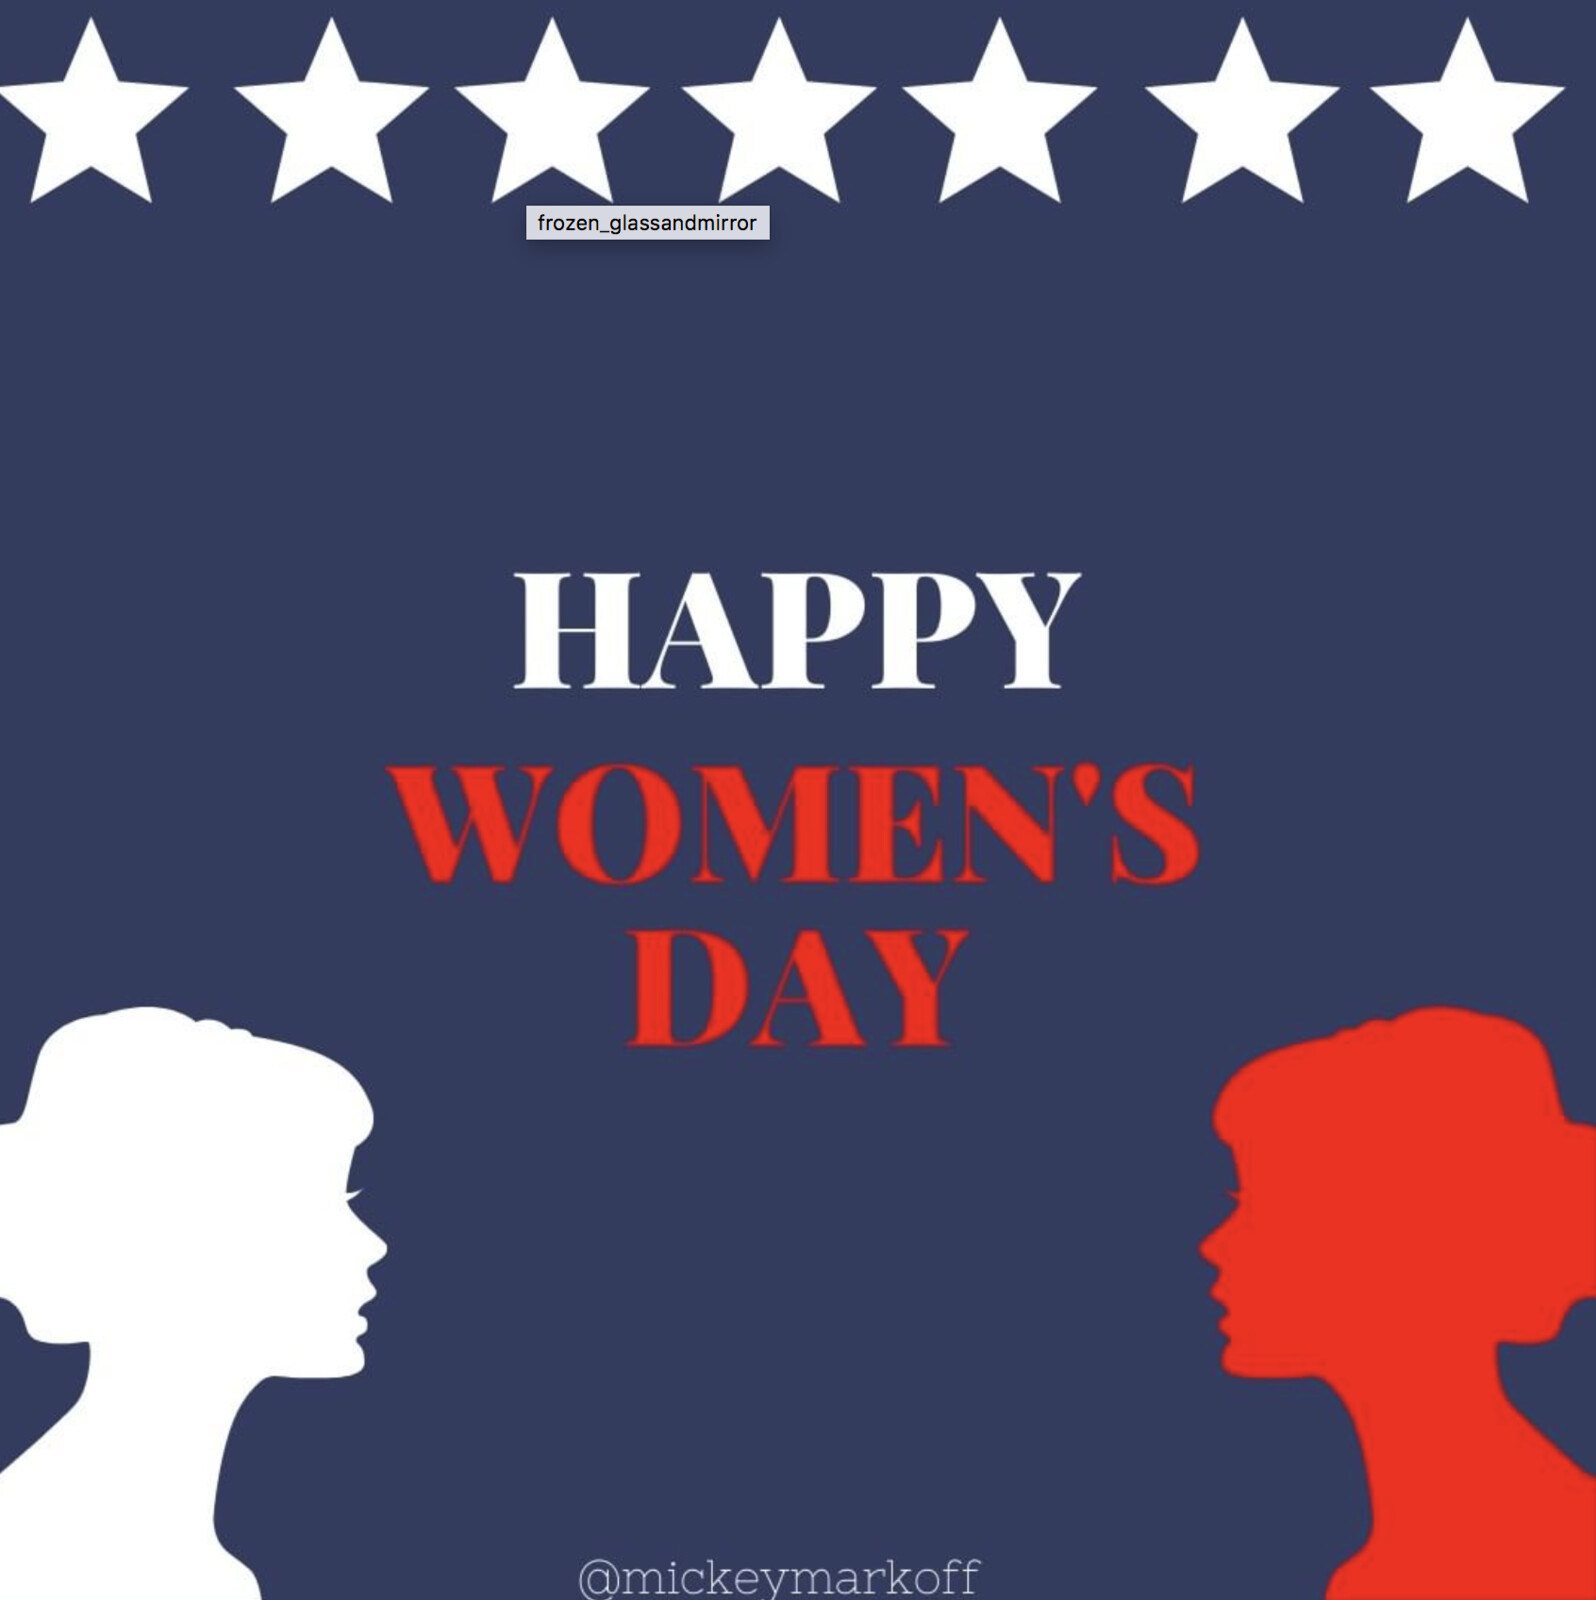 Mickey Markoff - Air and Sea Show Executive Producer - “Happy Women's Day"